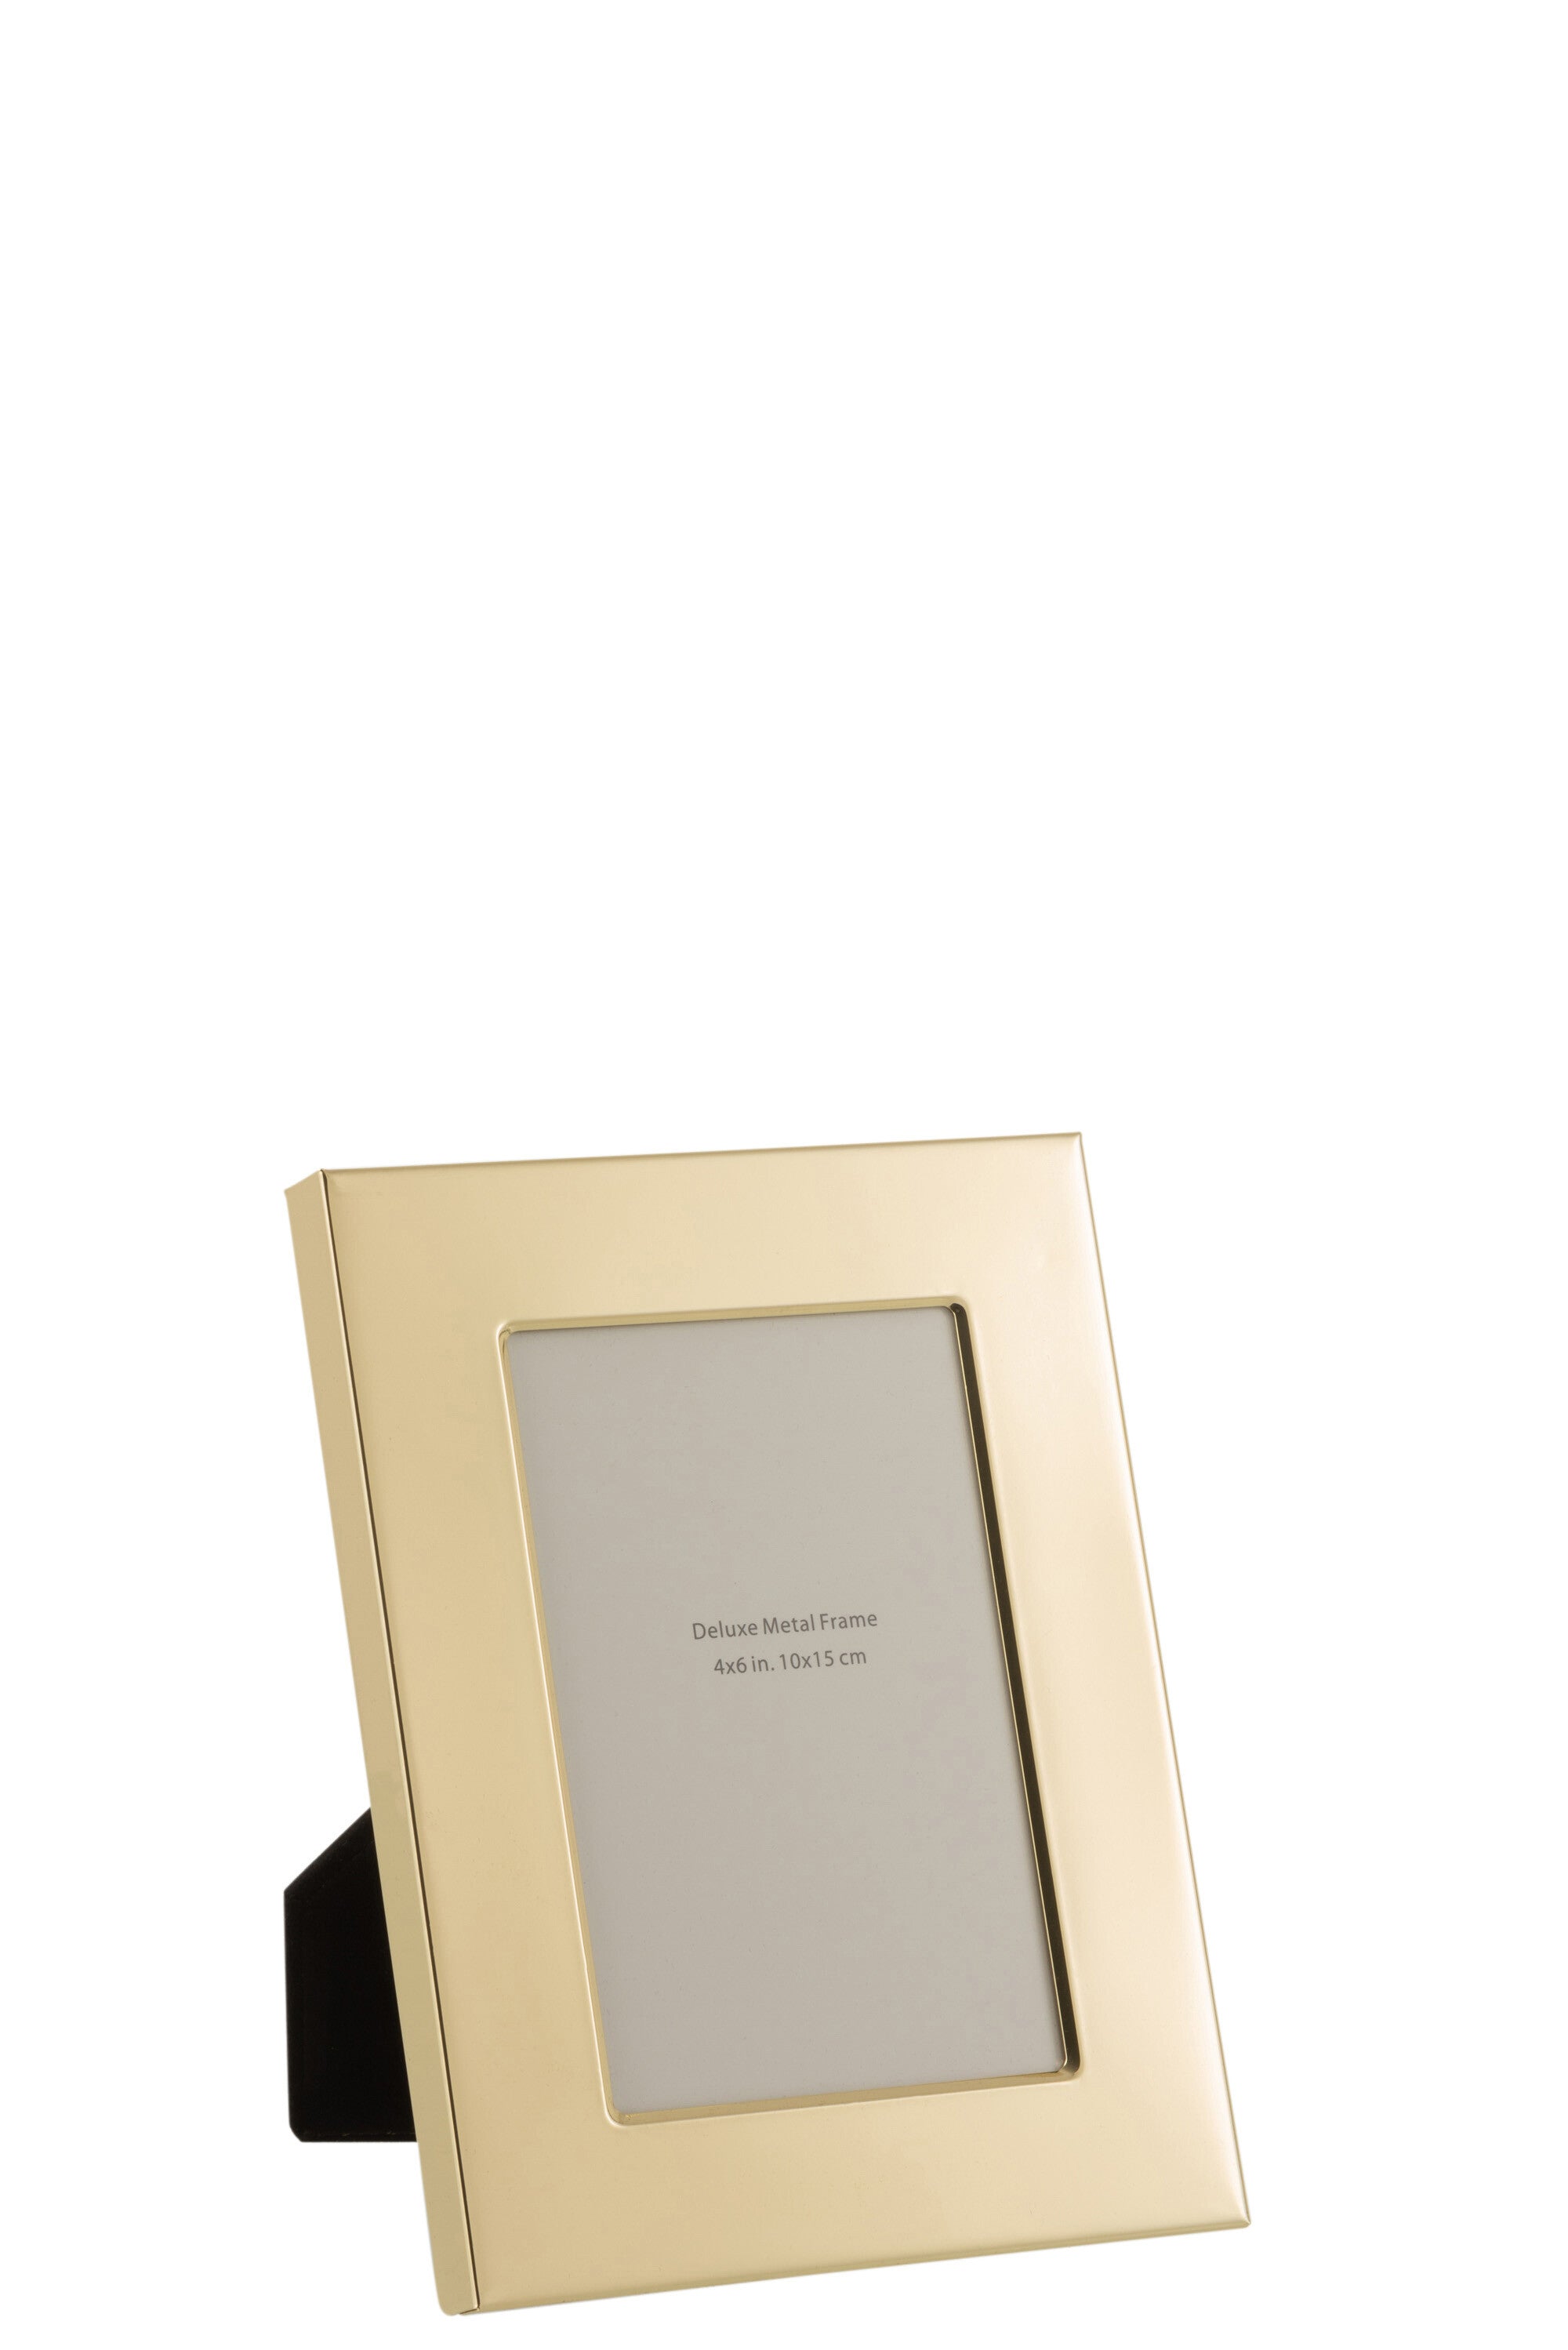 Fab Gifts | J-Line Photo Frame Wide Gold 4X6 by Weirs of Baggot Street